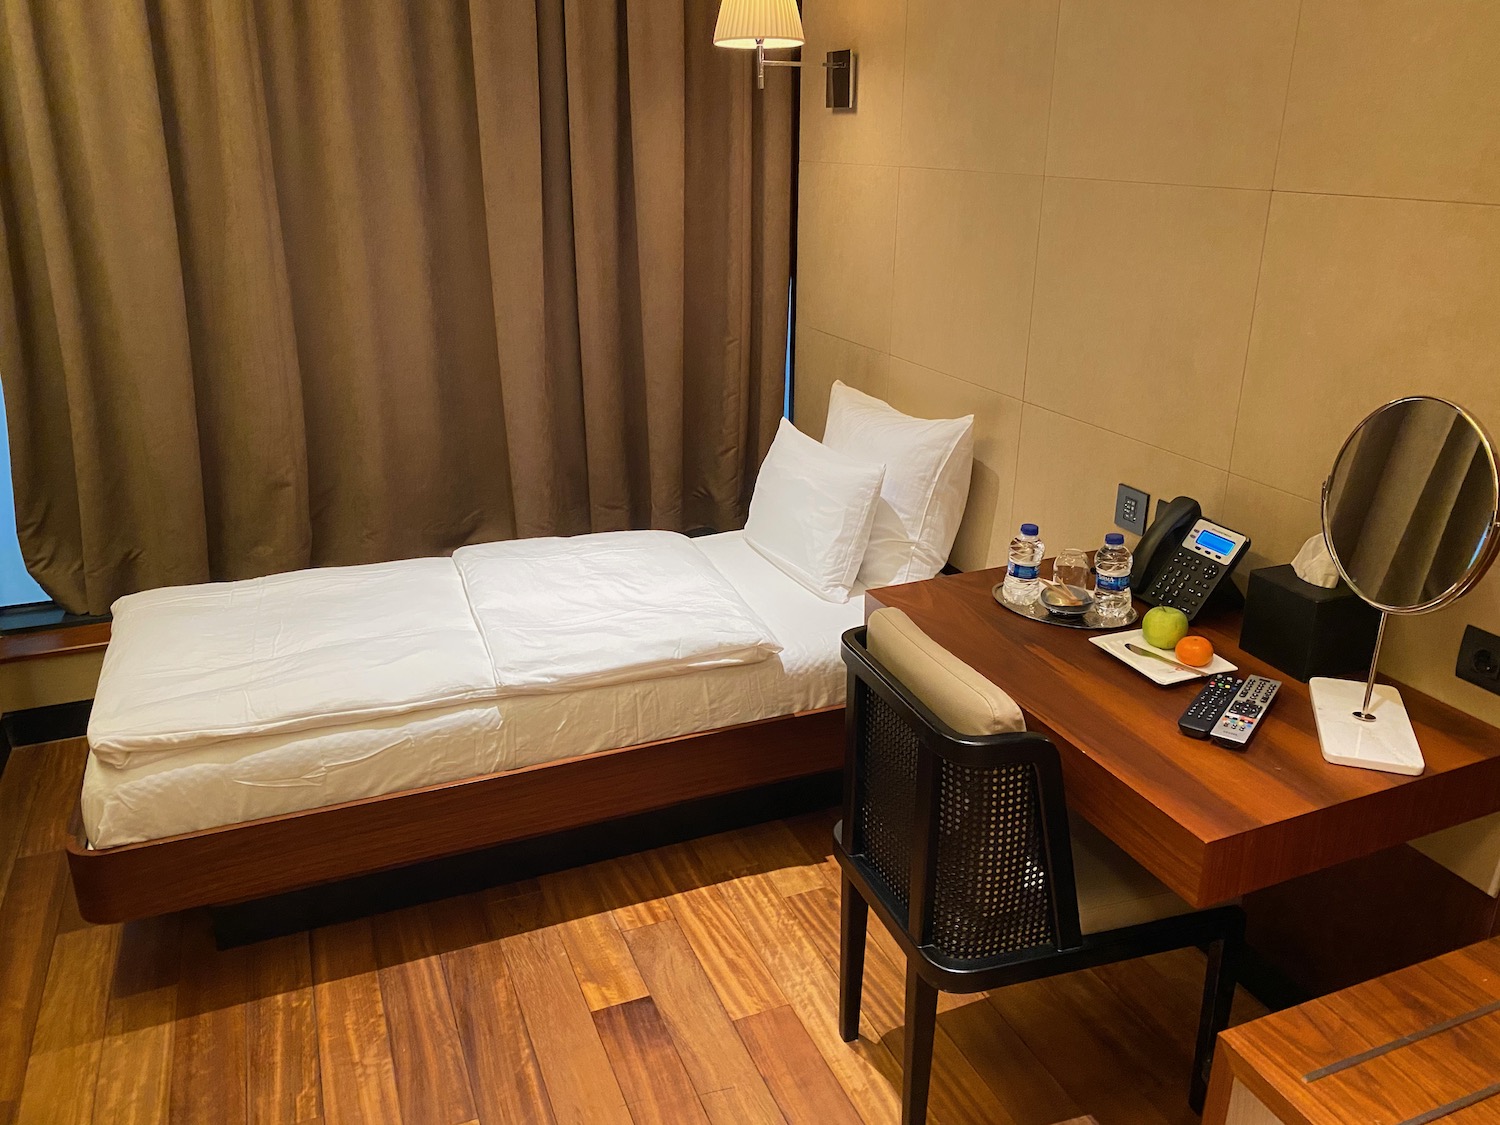 a bed and desk in a hotel room